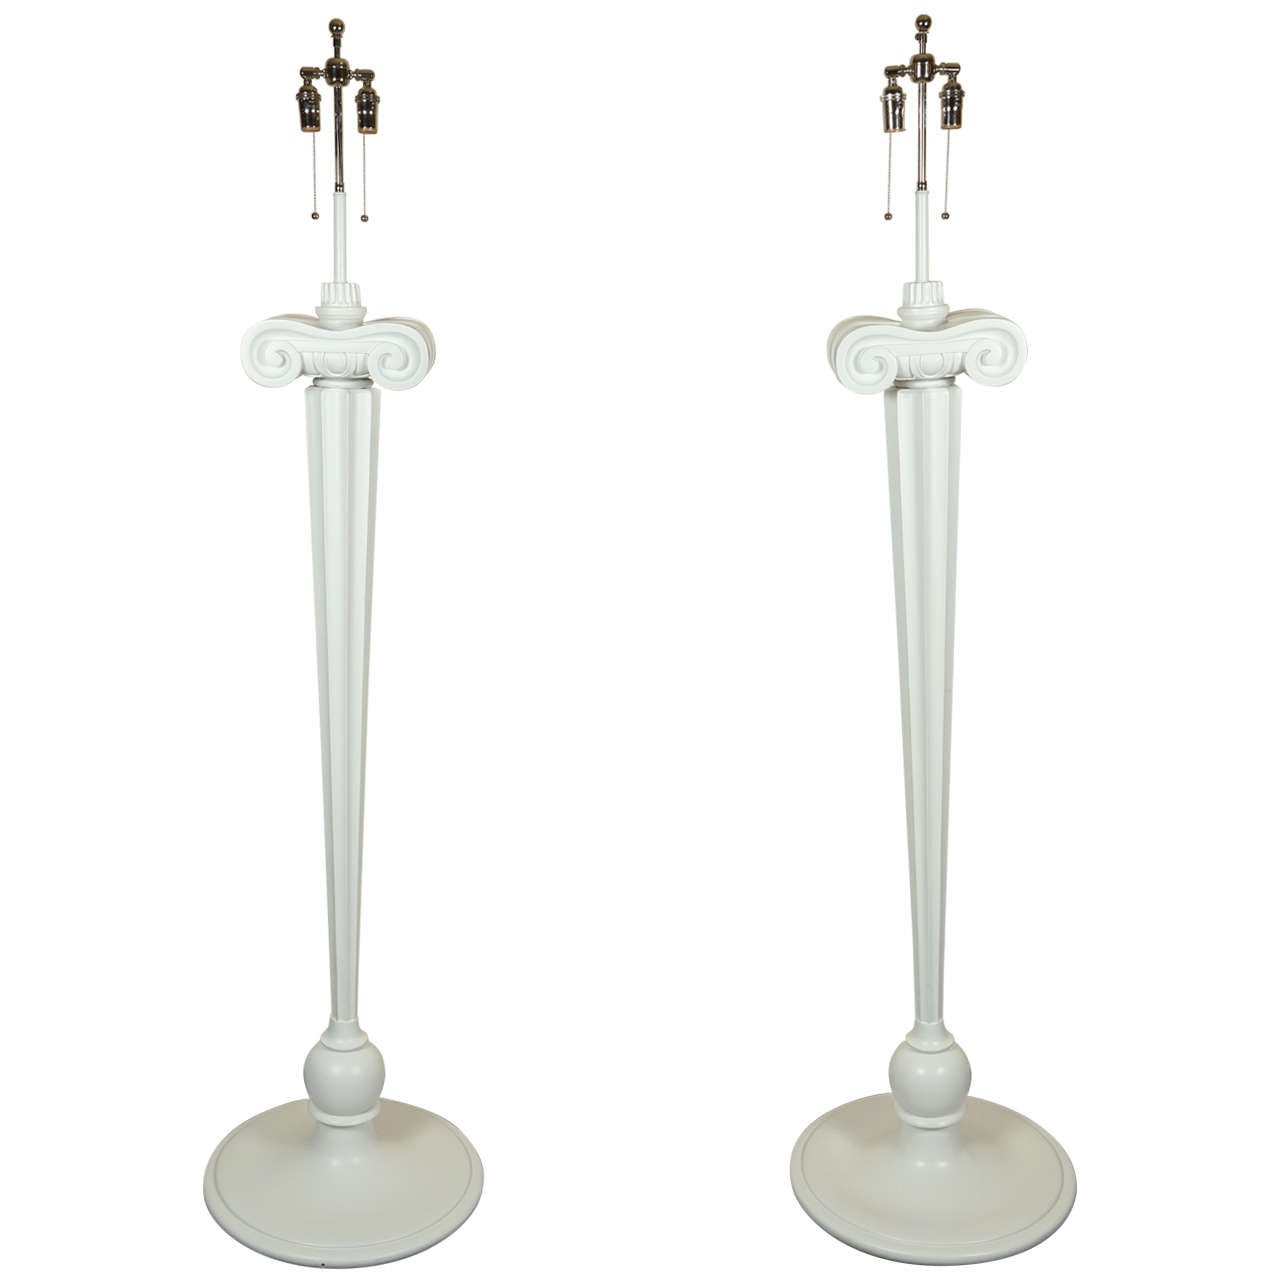 Spectacular Pair of Hollywood Regency Style Floor Lamps from Eden Roc Hotel